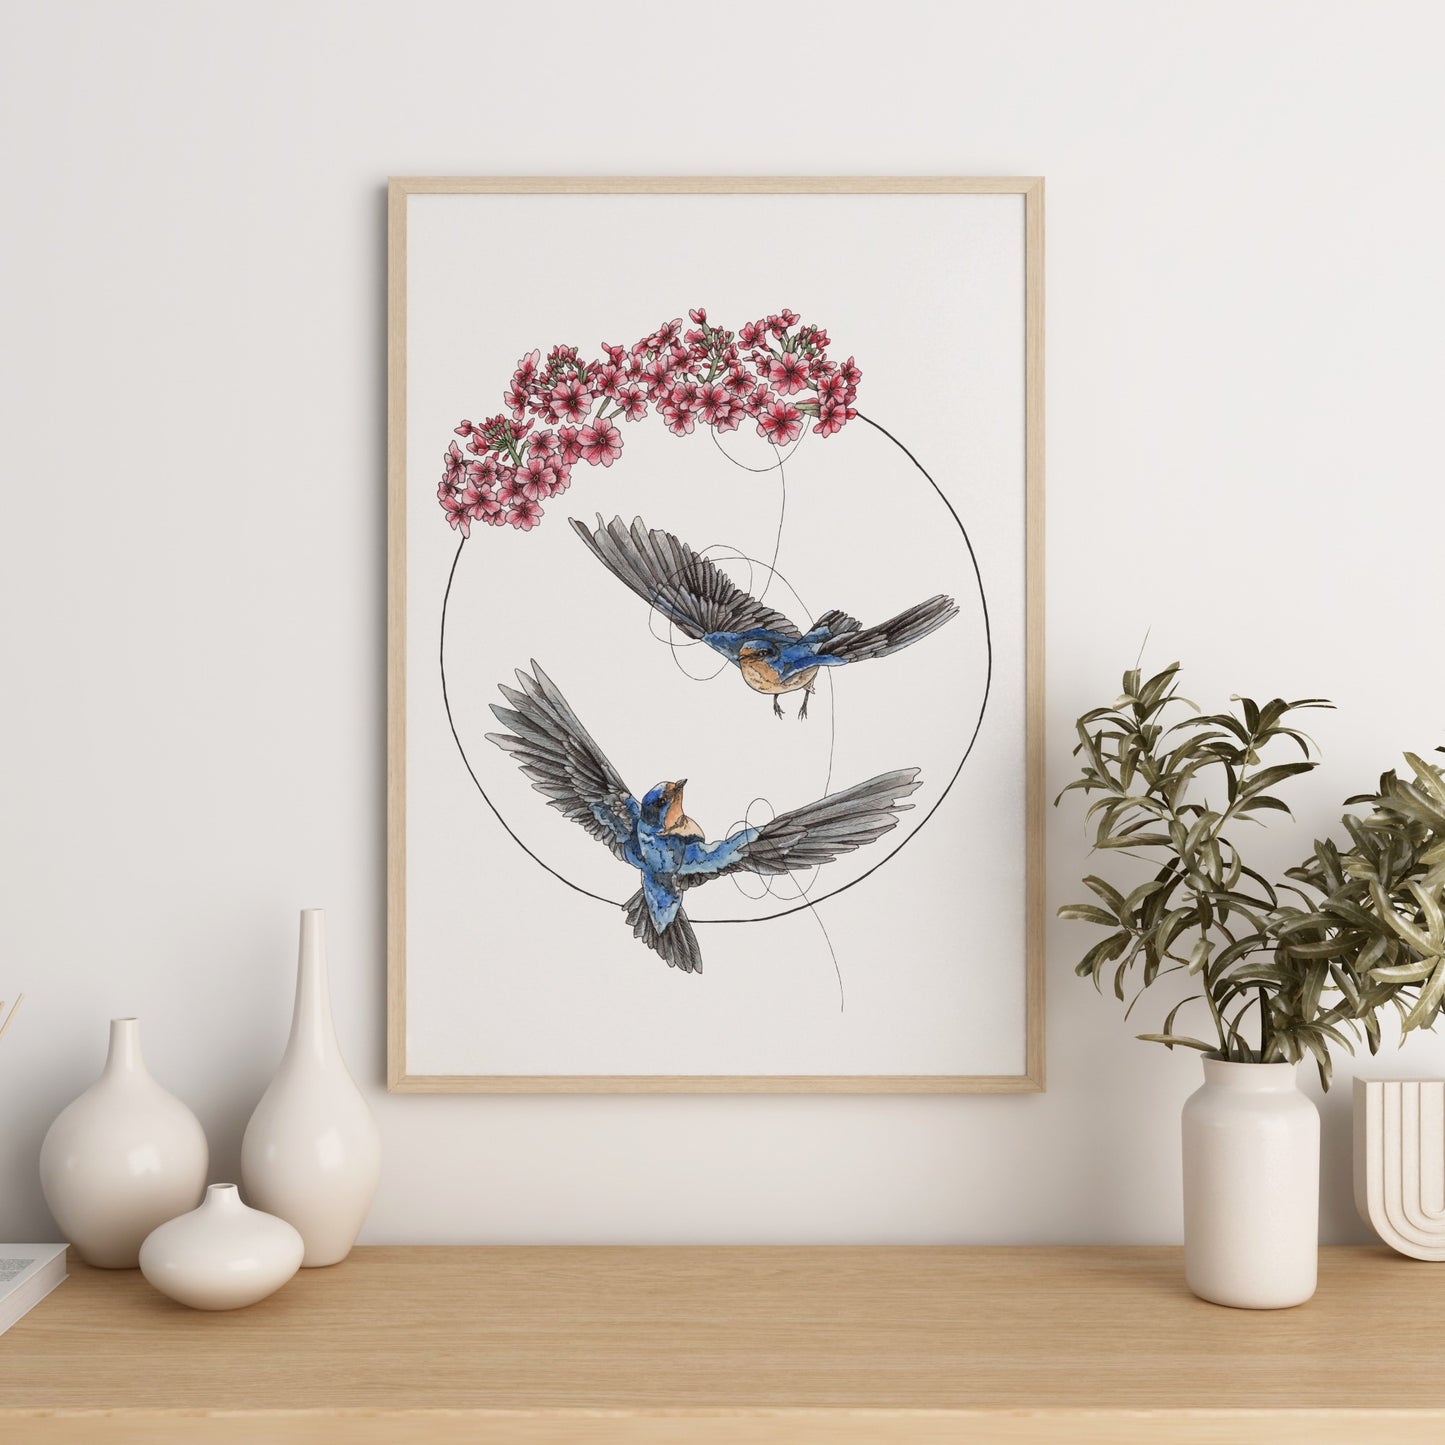 Watercolour art featuring 2 swallows flying together tethered by a string in a circle and topped with primrose flowers.